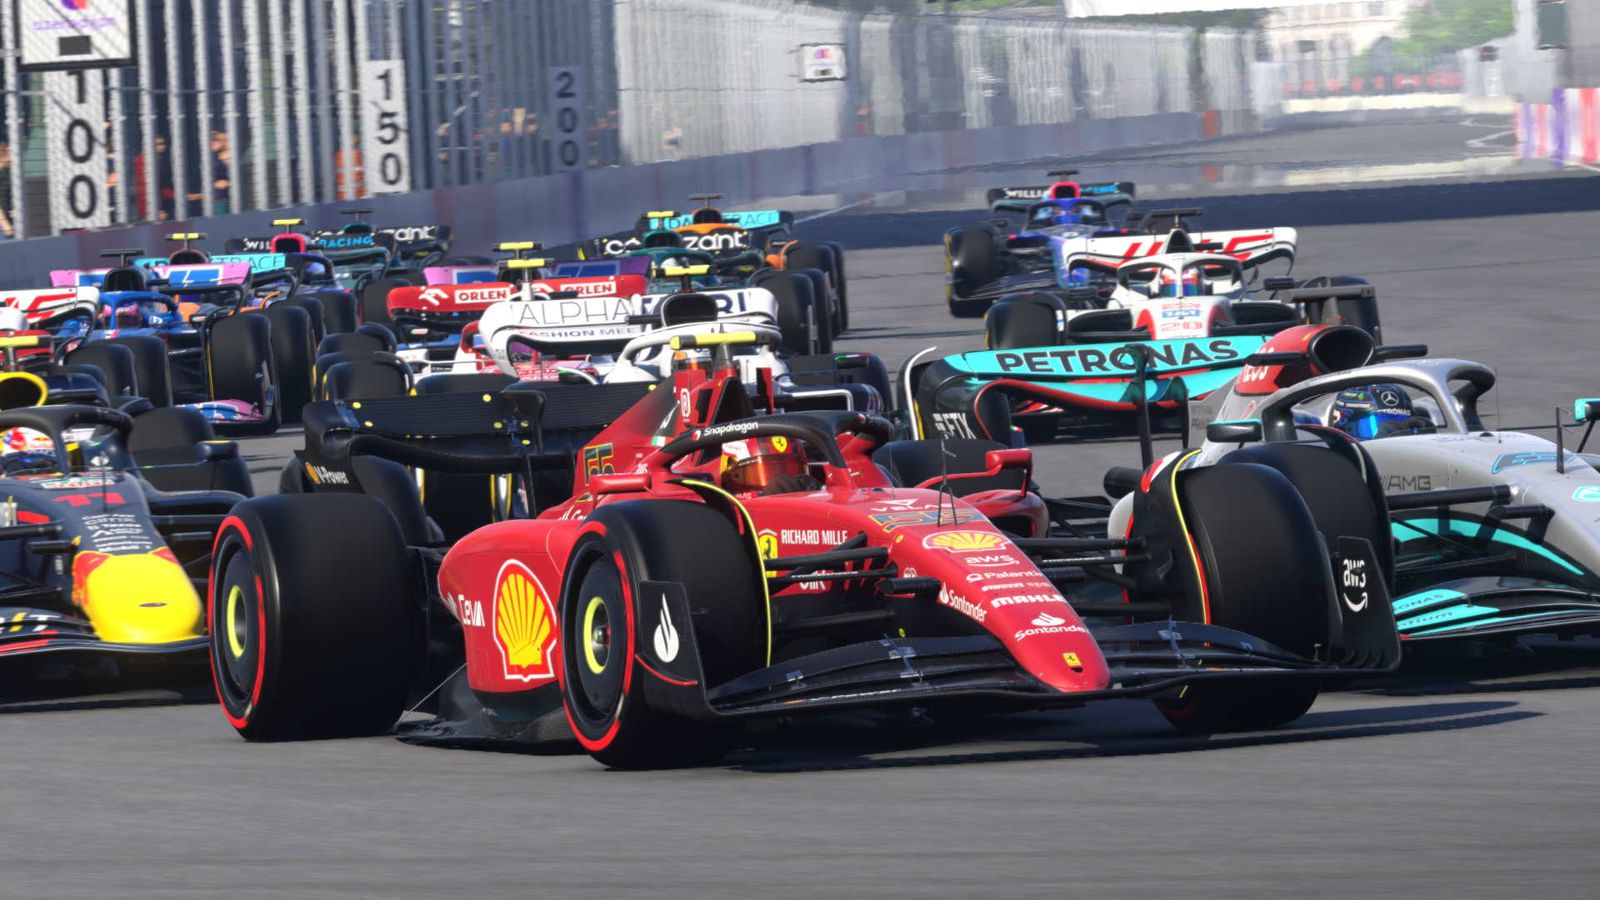 Cars fighting for position near the start of an F1 22 race